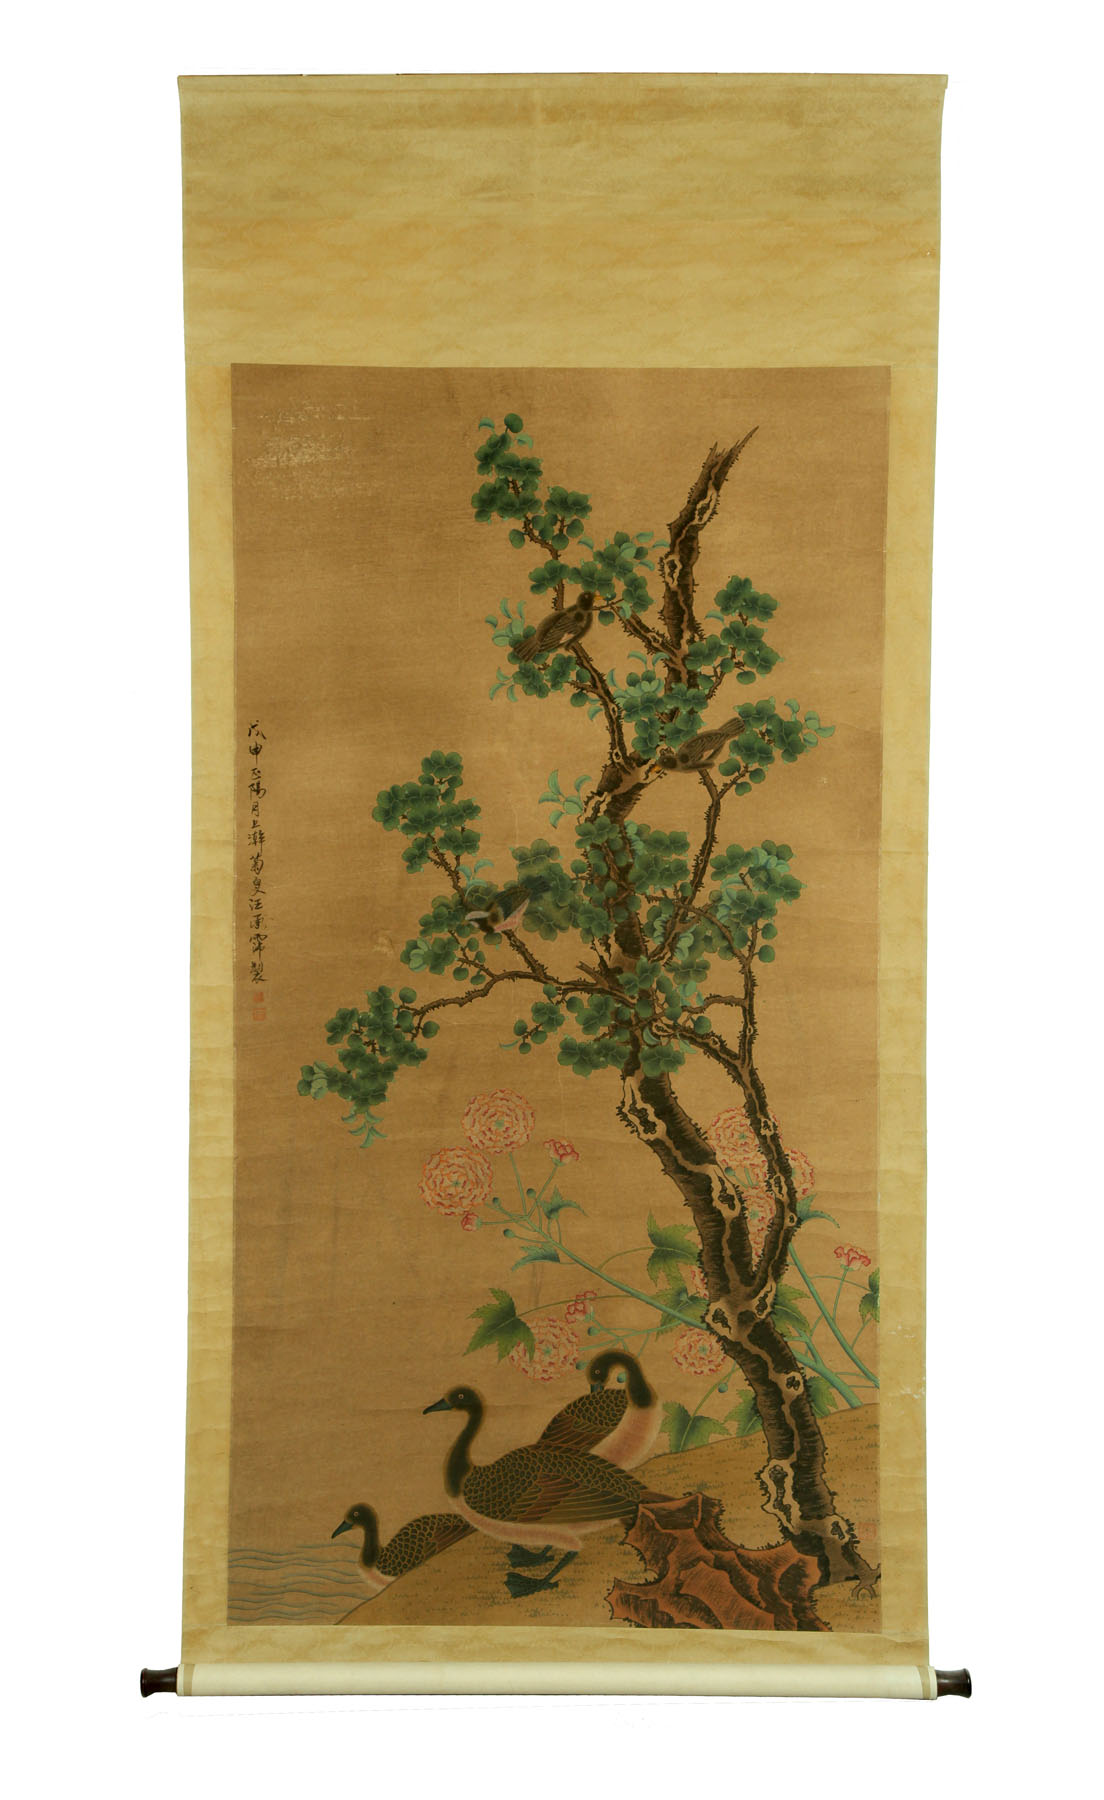 SCROLL ATTRIBUTED TO WANG CHEN 113808